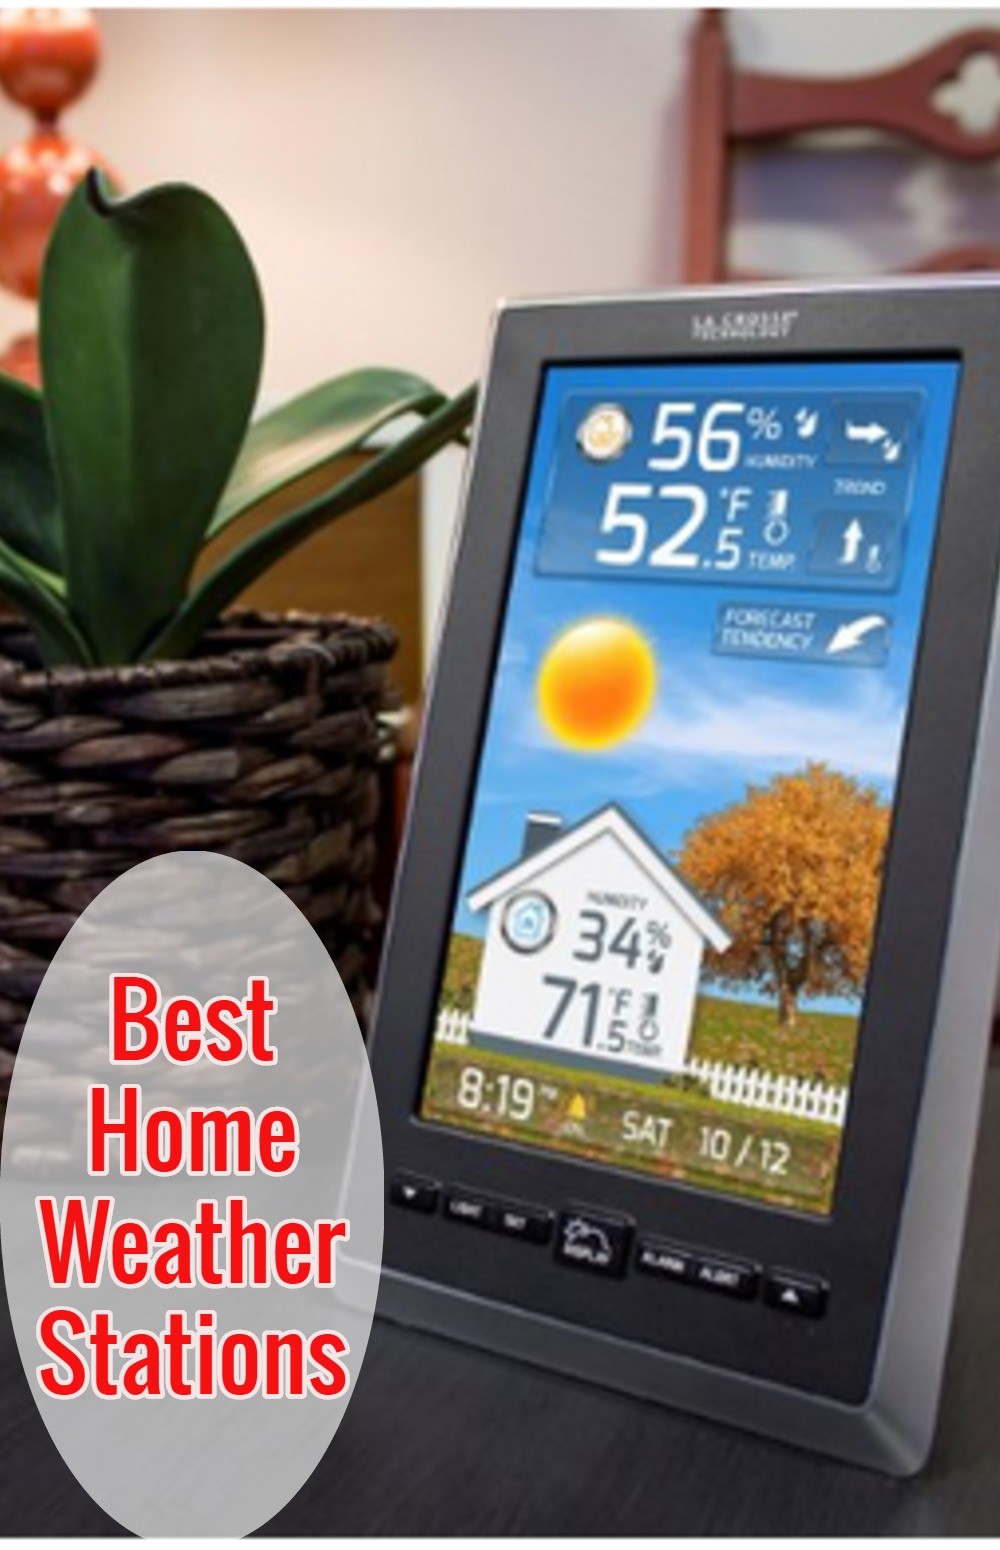 This is a great wireless home weather station.  Indoor/outdoor thermometer, weather alerts and weather forecast.  Every home should have one of these for bad weather alerts.